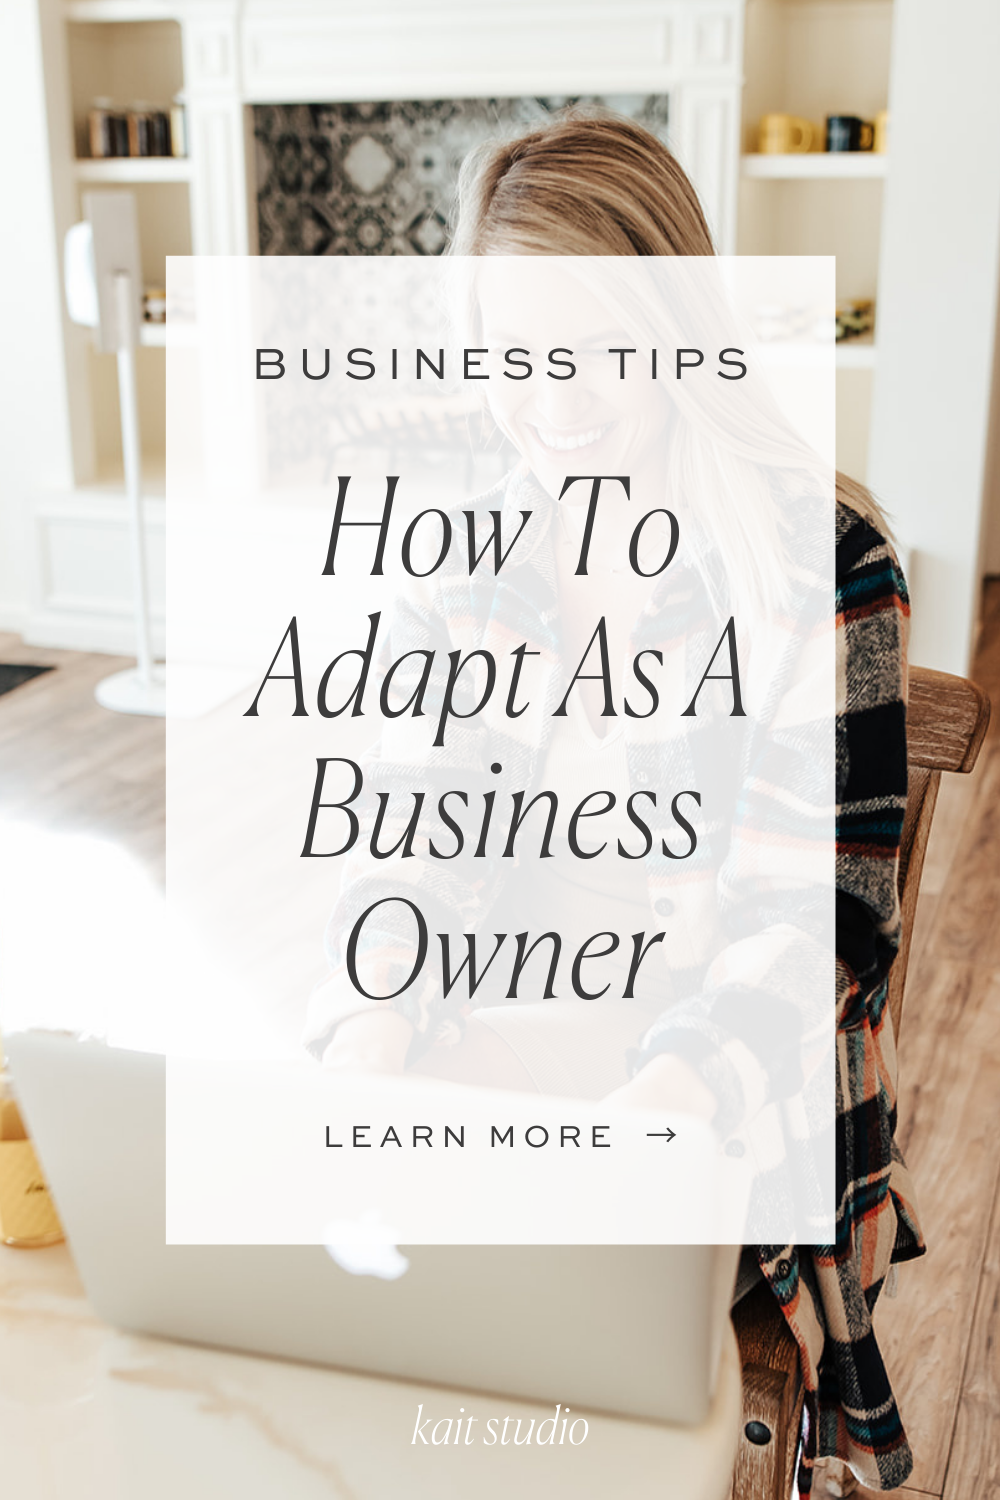 Adapt As A Business Owner